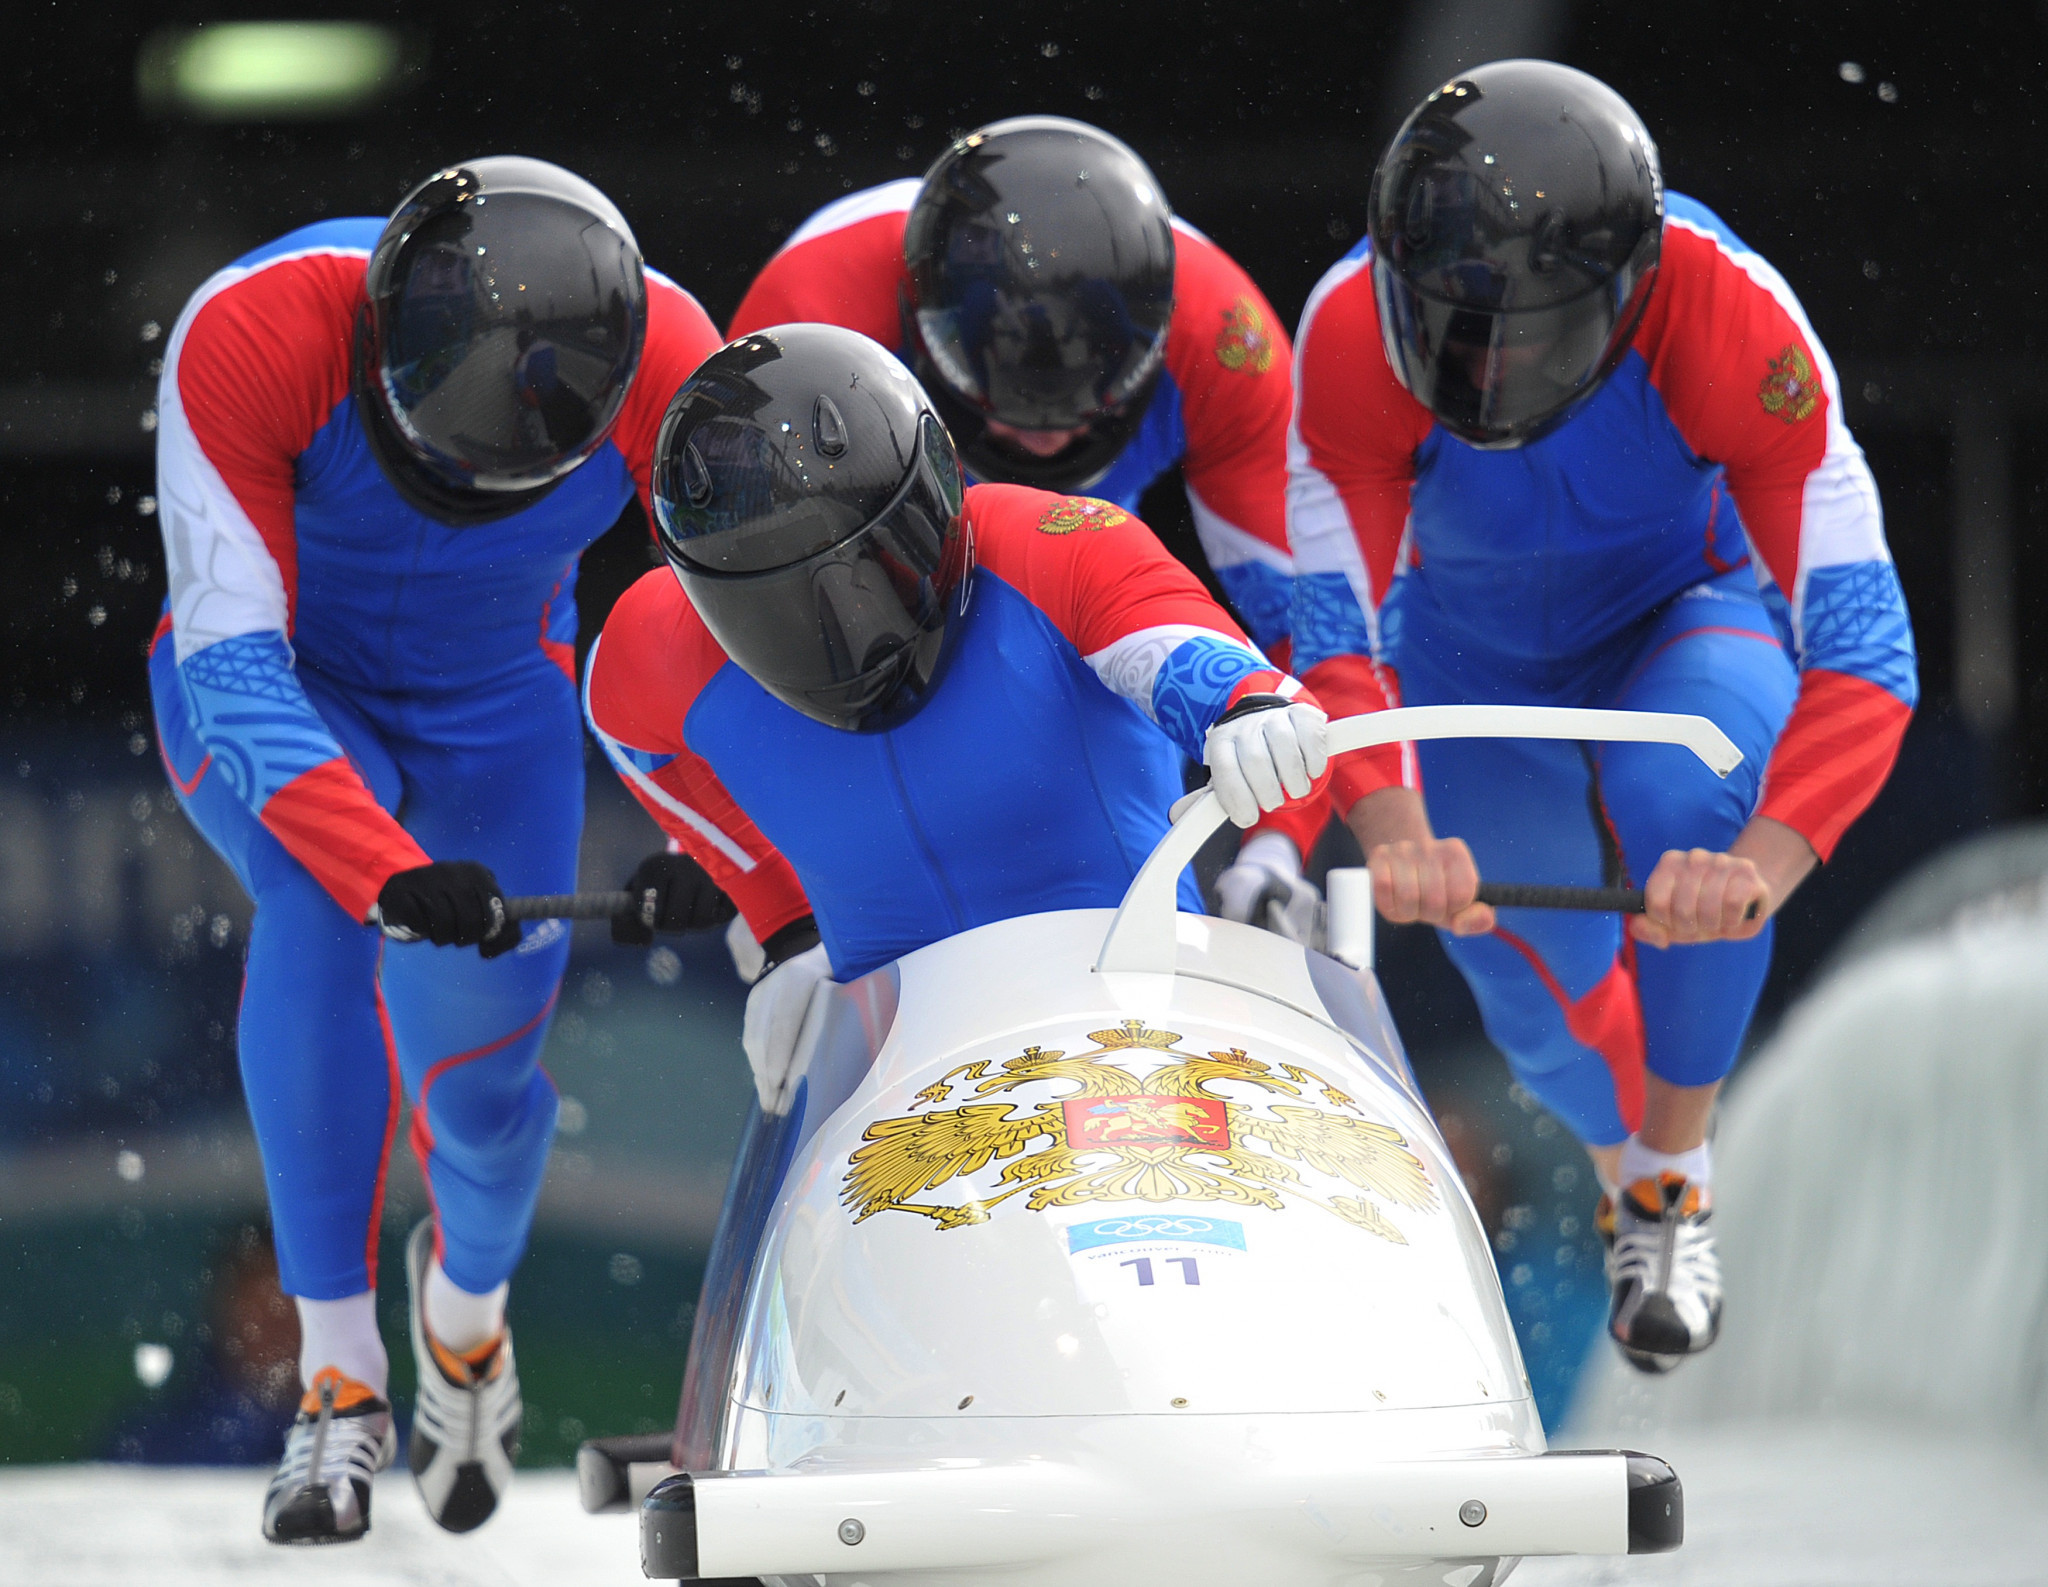 The IBSF has reinstated the Bobsleigh Federation of Russia as a member ©Getty Images